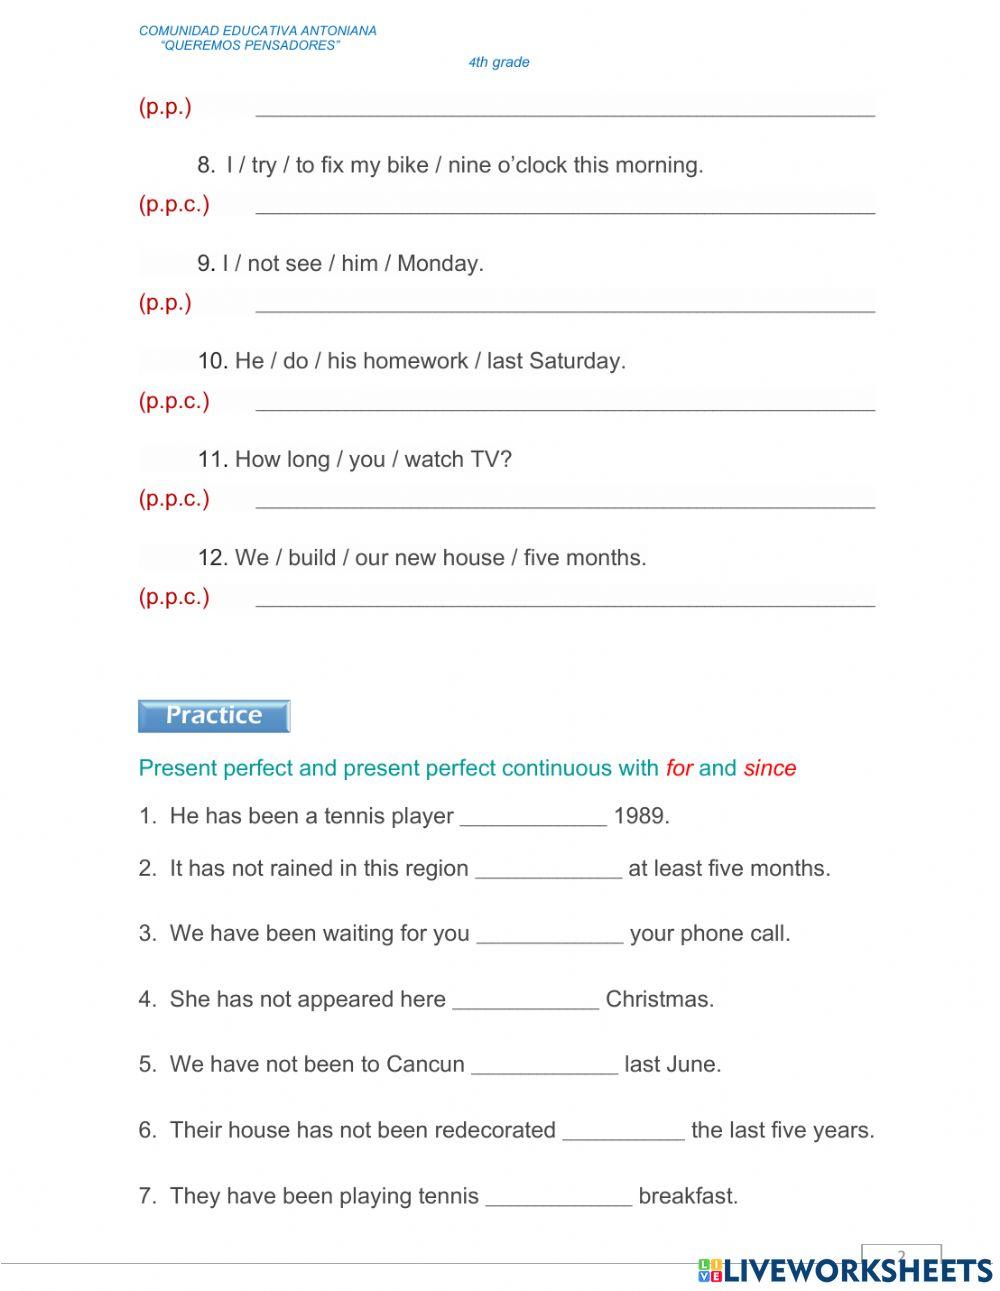 Present perfect continuous online exercise for 4th | Live Worksheets